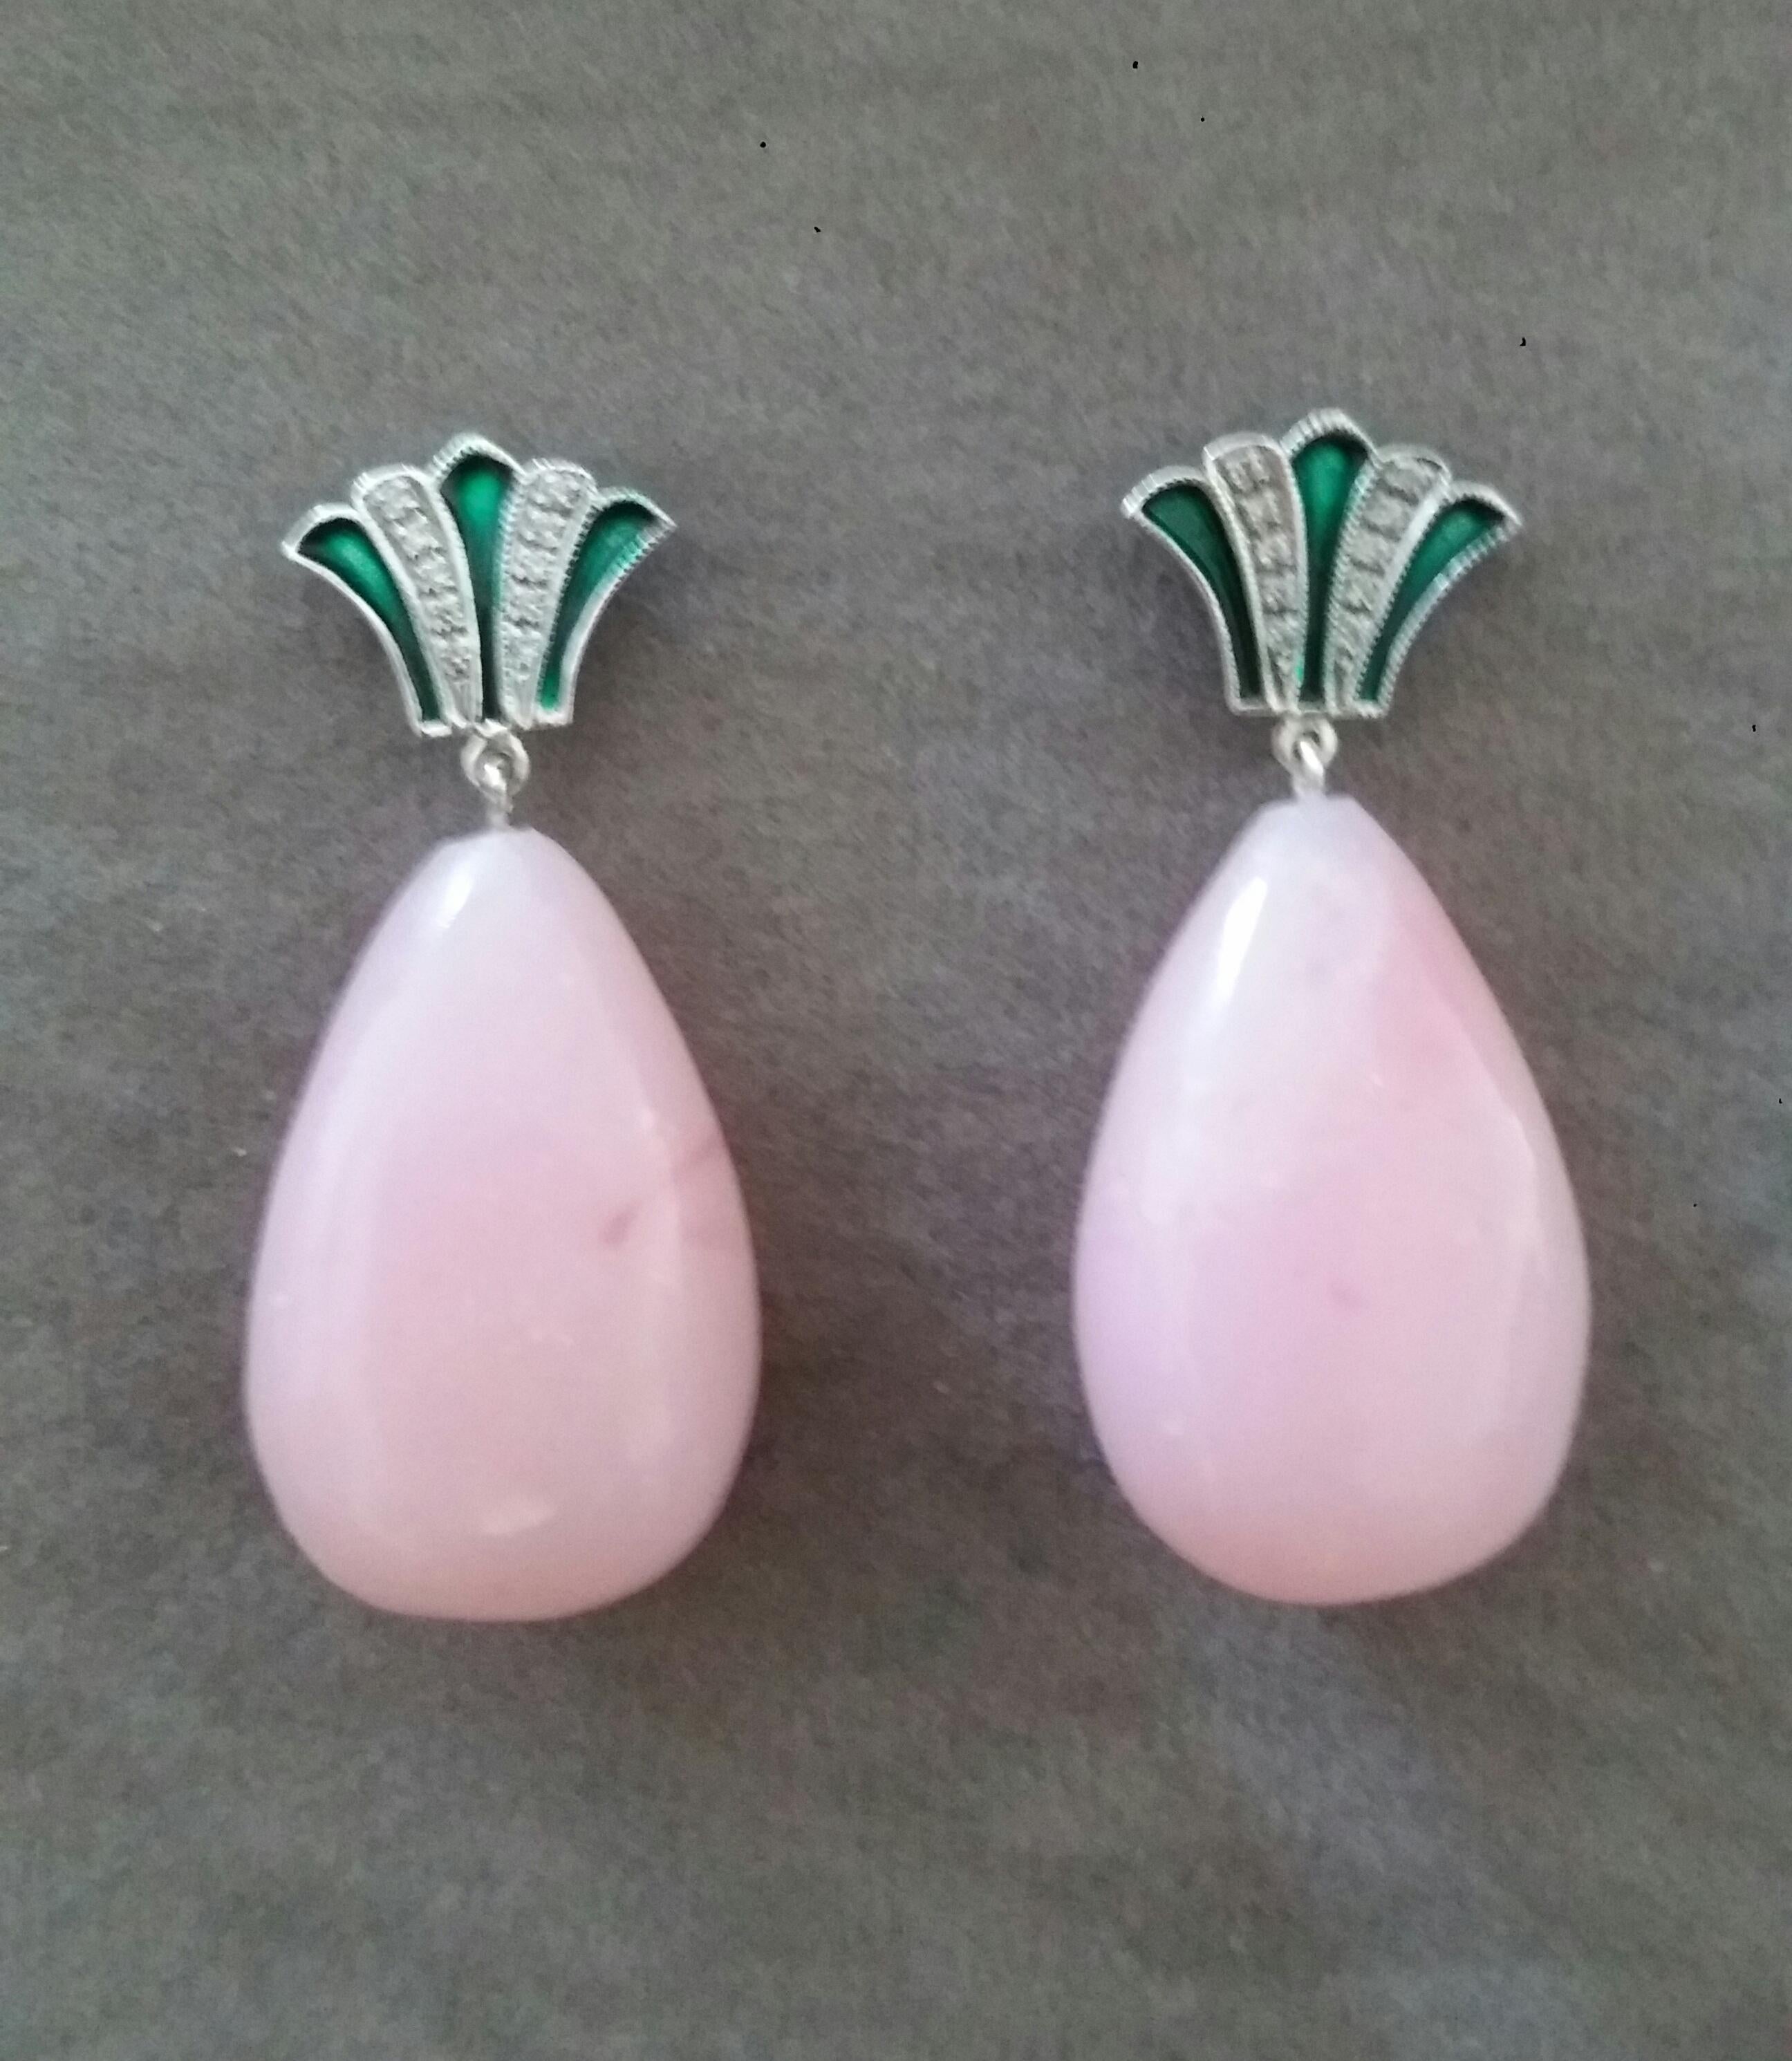 In these classic Art Deco Style earrings the tops are 2 crown shape elements  in 14 kt.white gold, 20 round full cut diamonds and green enamel ,in the lower parts we have  2 Pink Opal Round Drops measuring 16mm x 25mm

In 1978 our workshop started